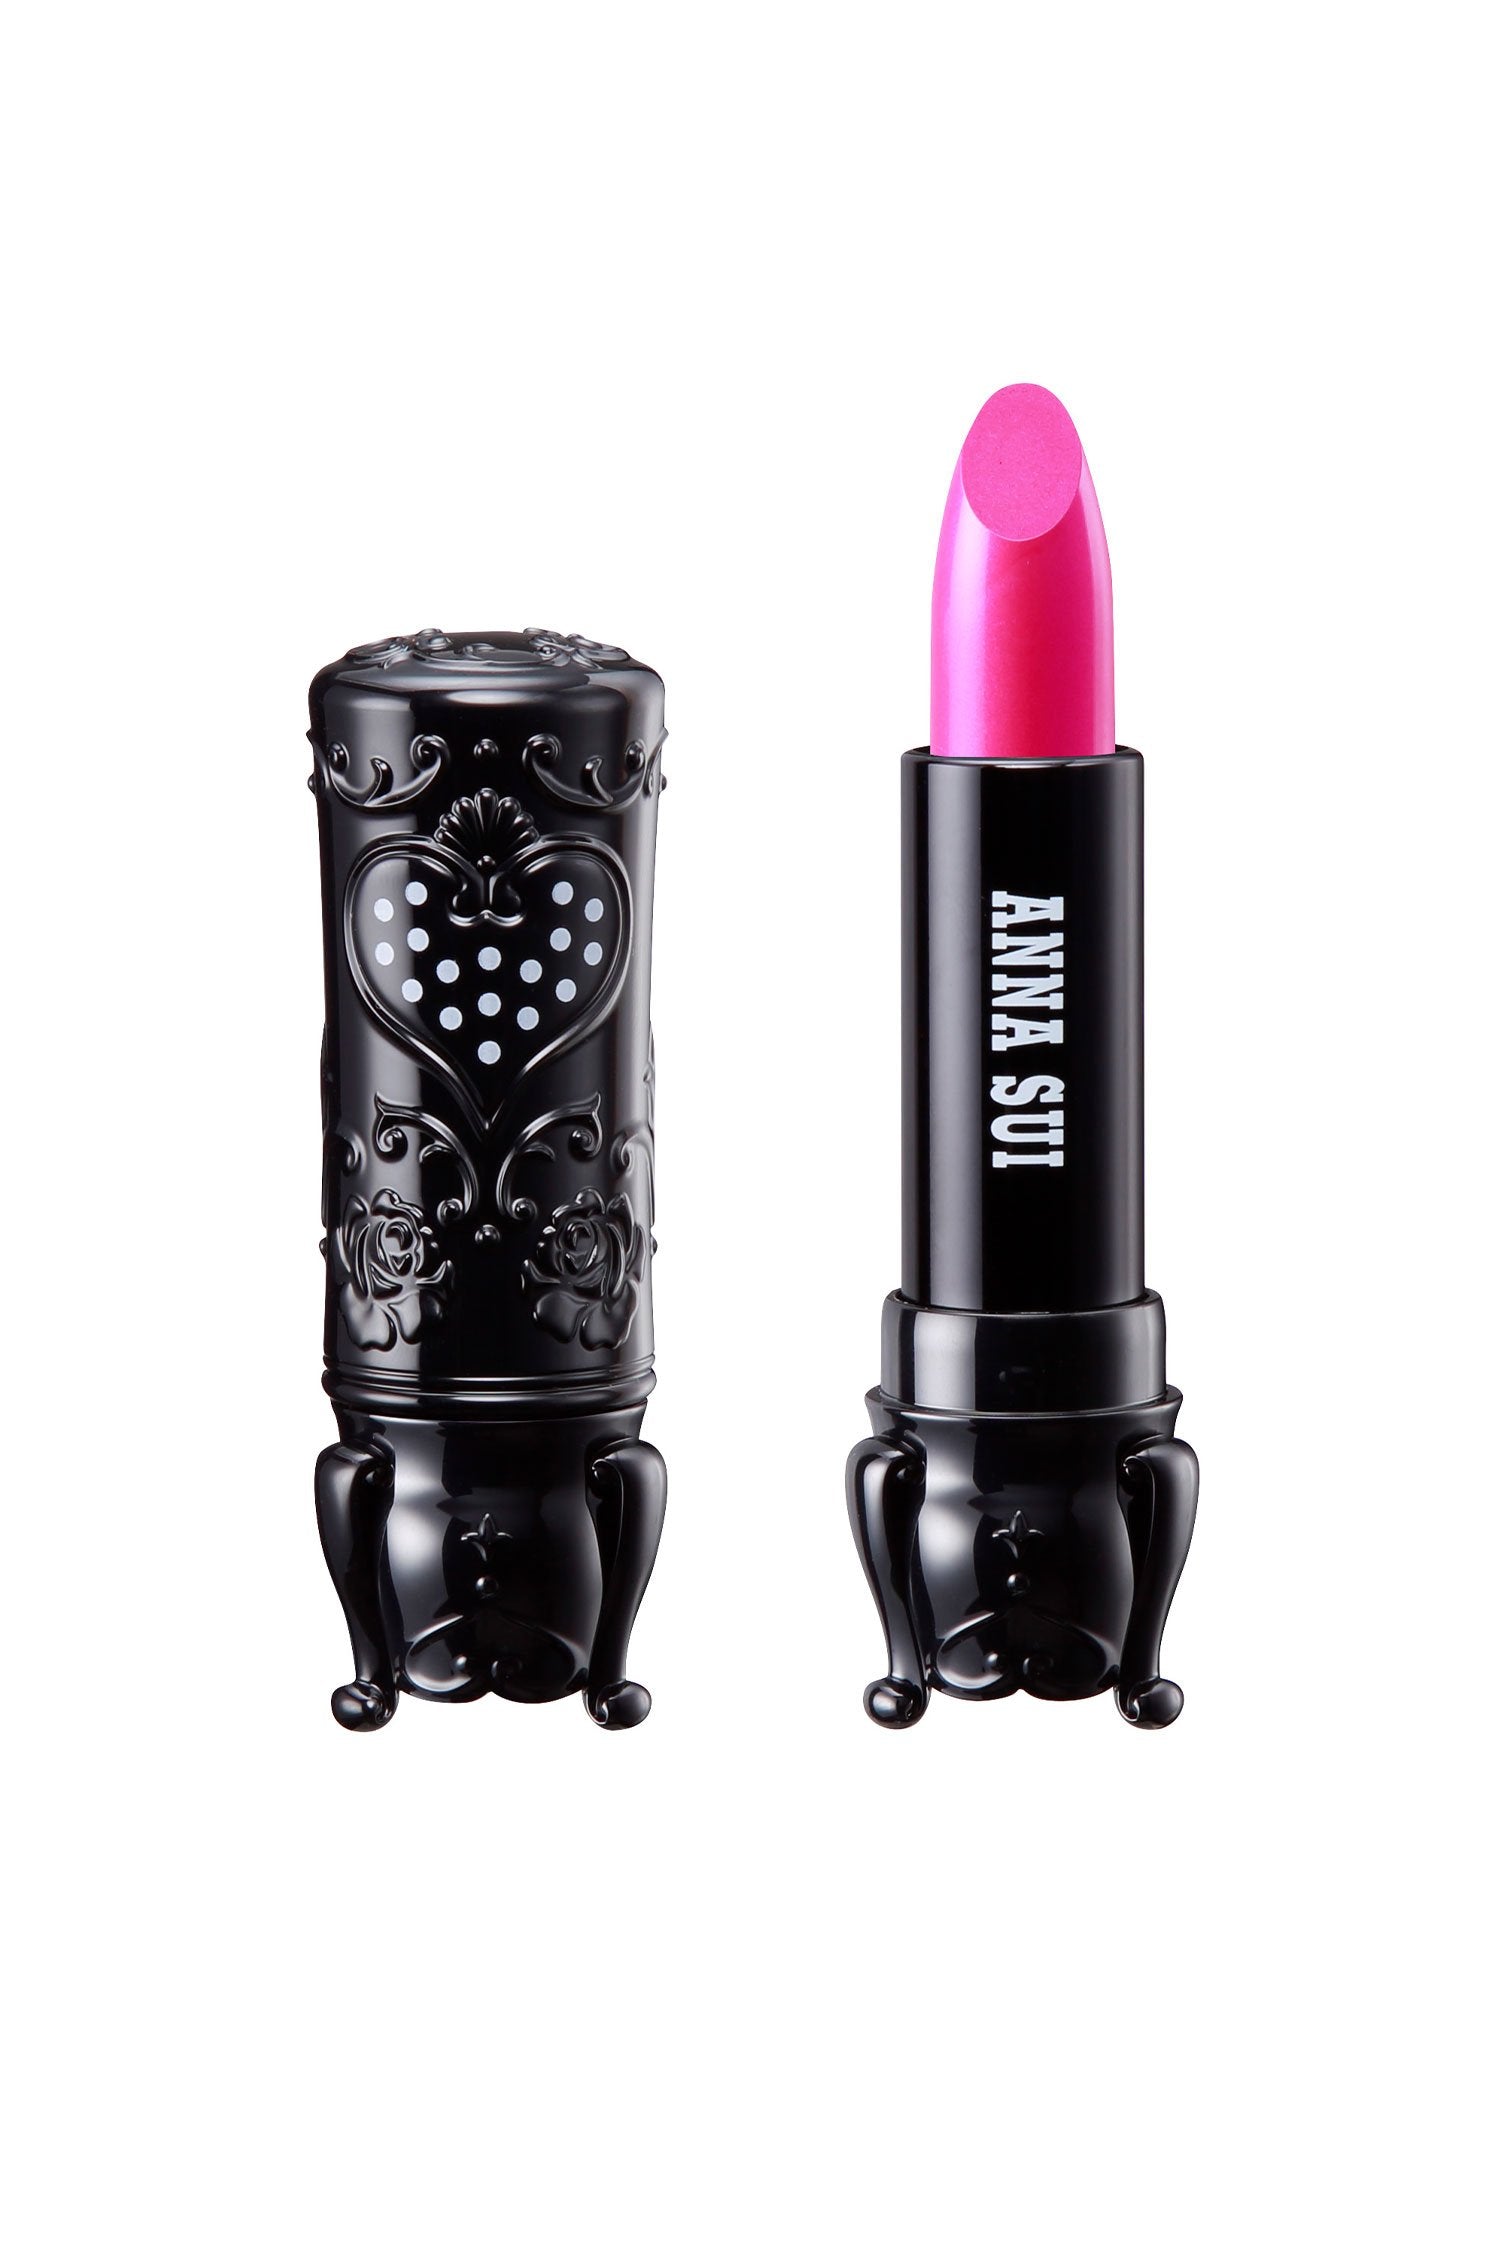 Sui Black - Rouge S 301 Neon Pink in a cylindrical case, with 3 legs, a heart with white dots and floral design on the cap